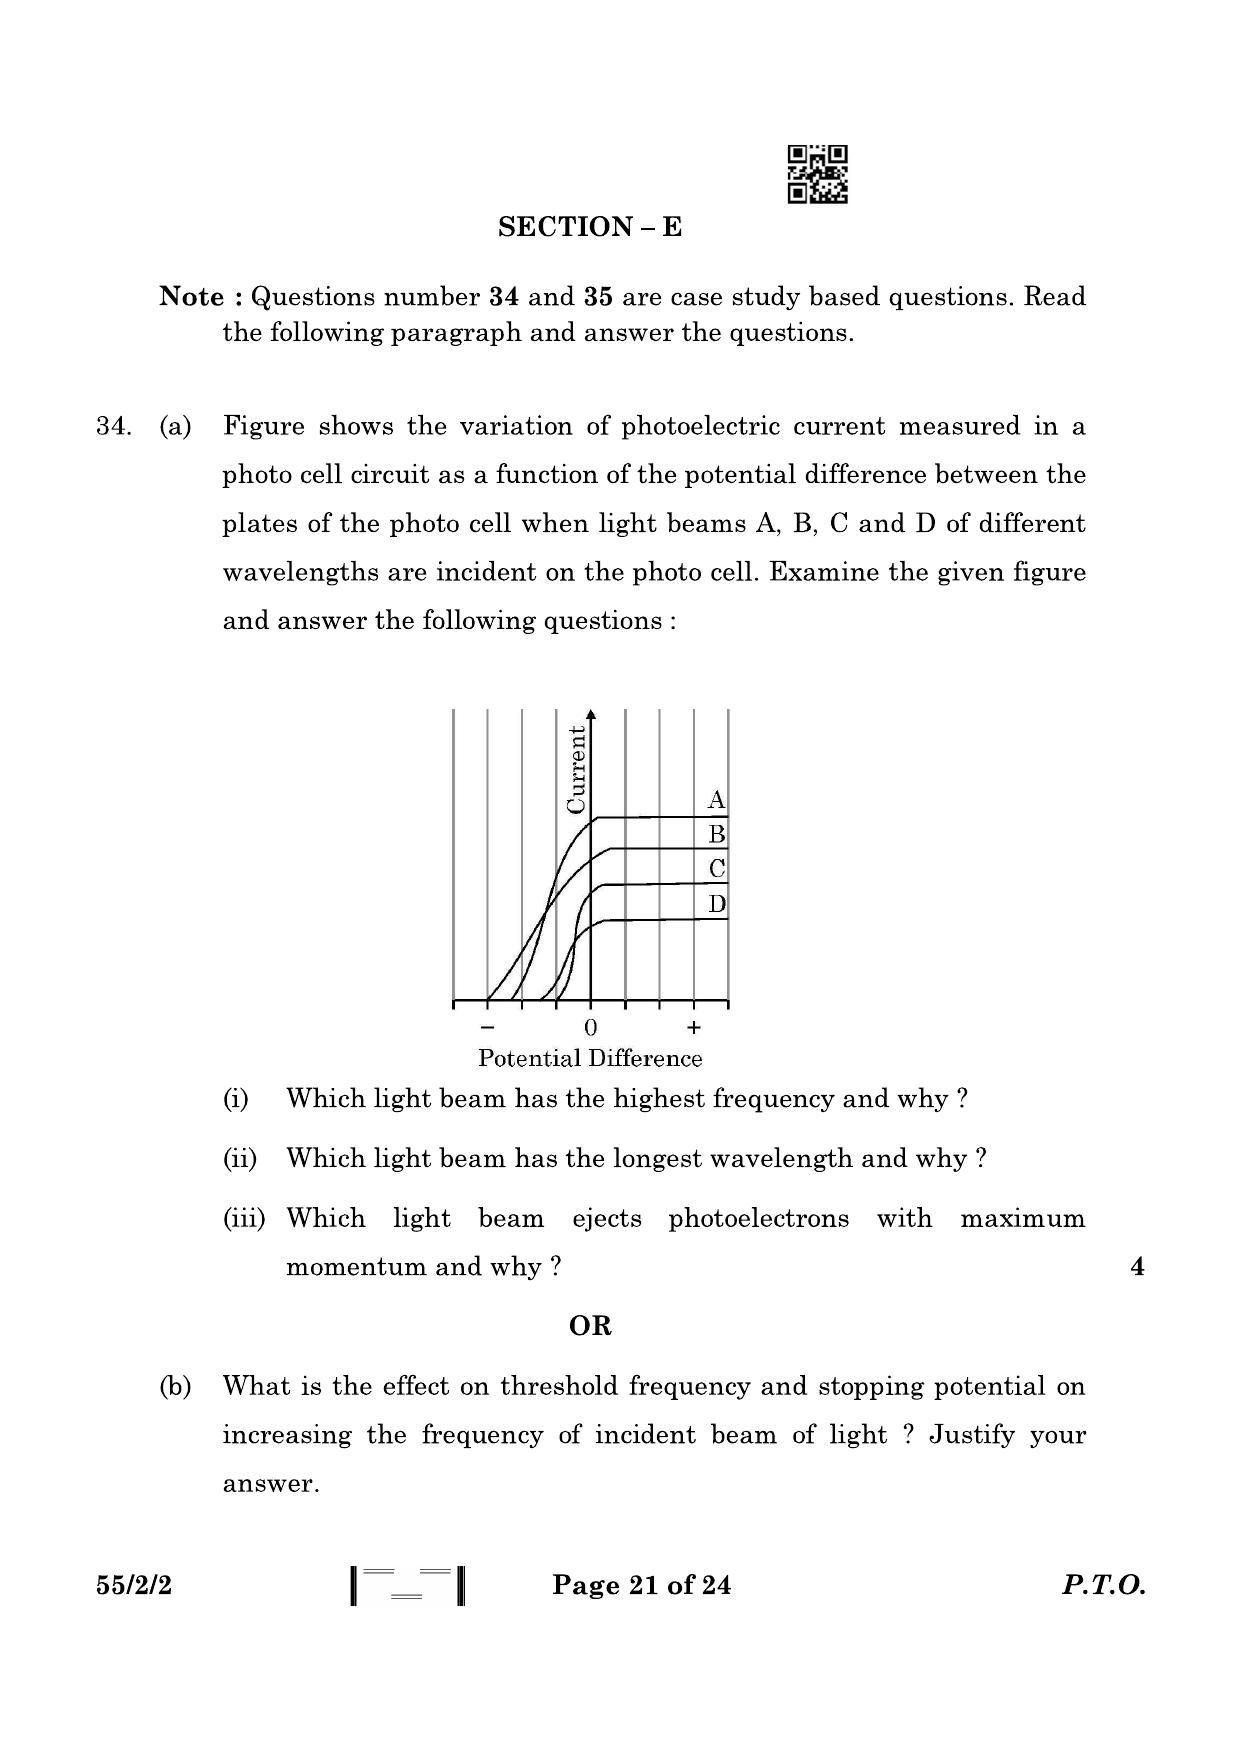 CBSE Class 12 55-2-2 Physics 2023 Question Paper - Page 21